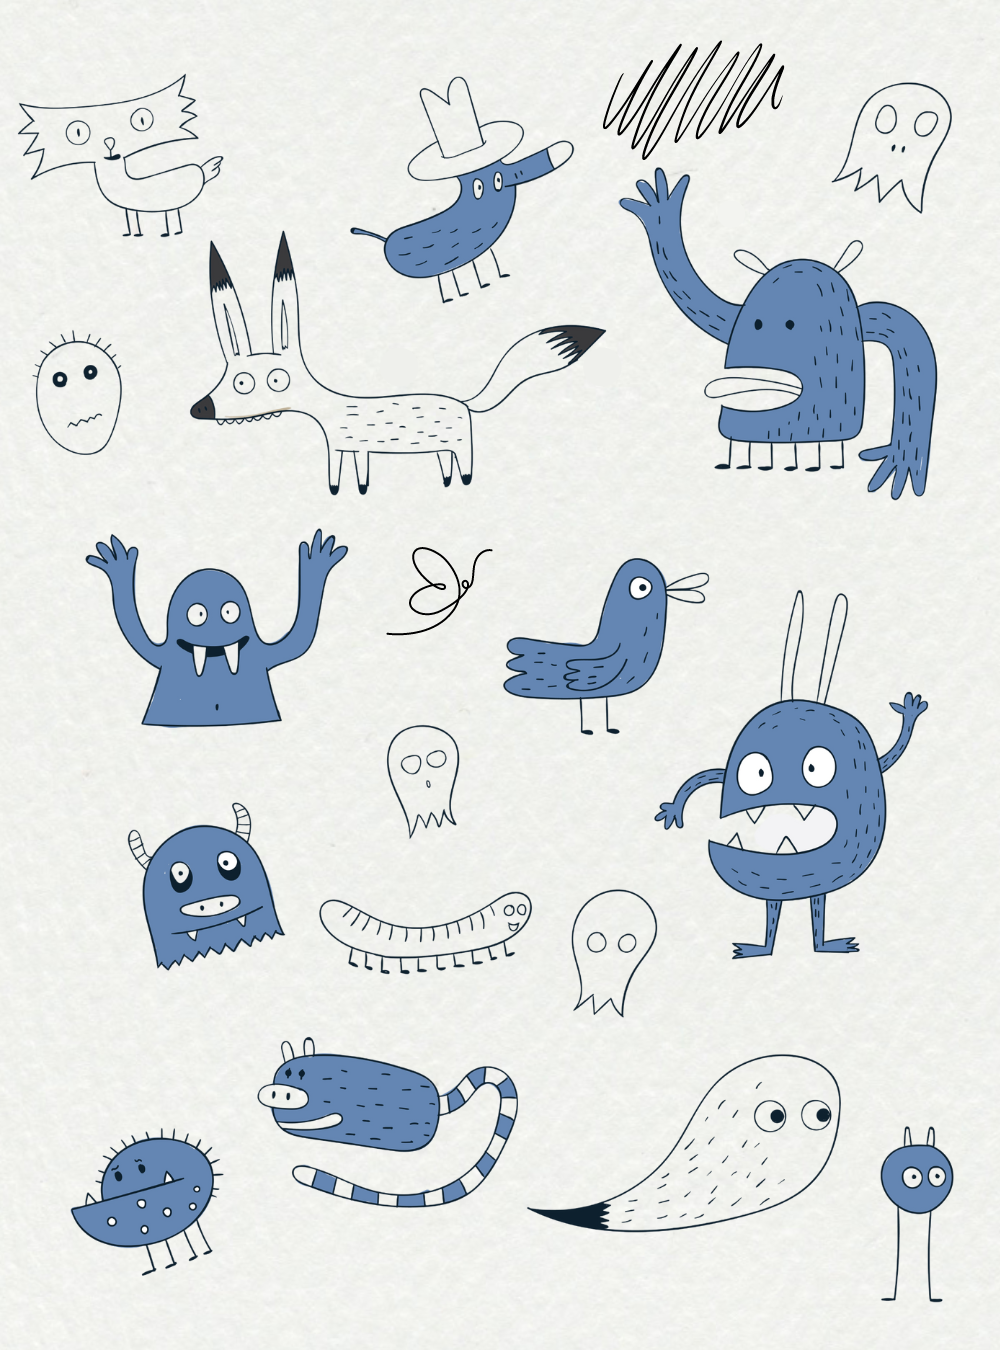 Fun Things To Draw: Monsters And Friends